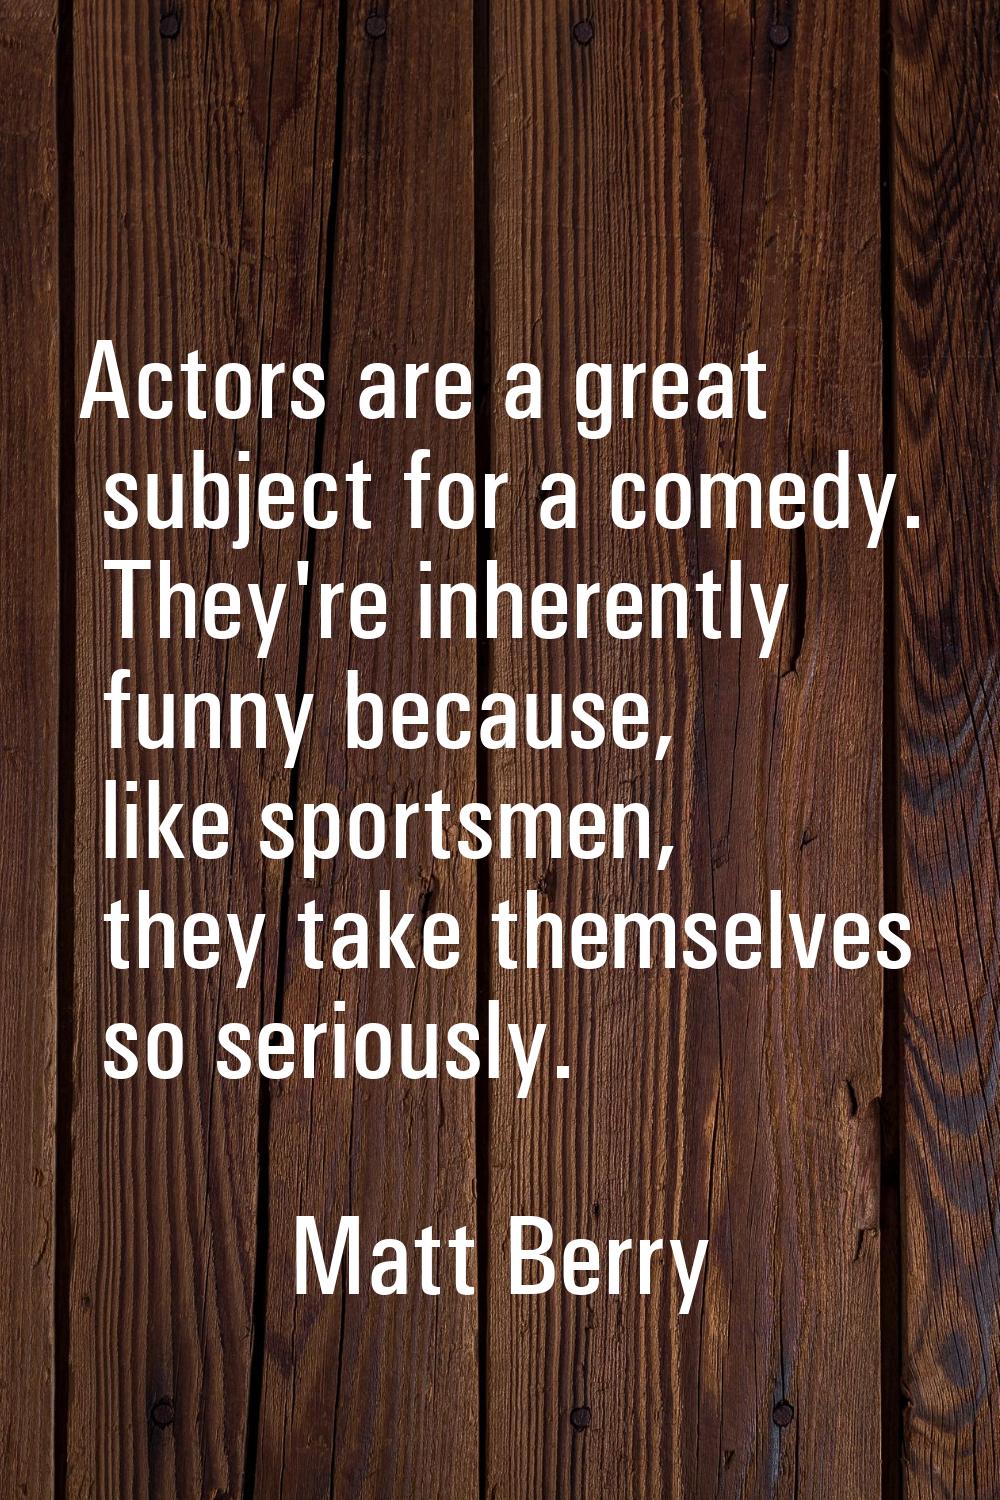 Actors are a great subject for a comedy. They're inherently funny because, like sportsmen, they tak